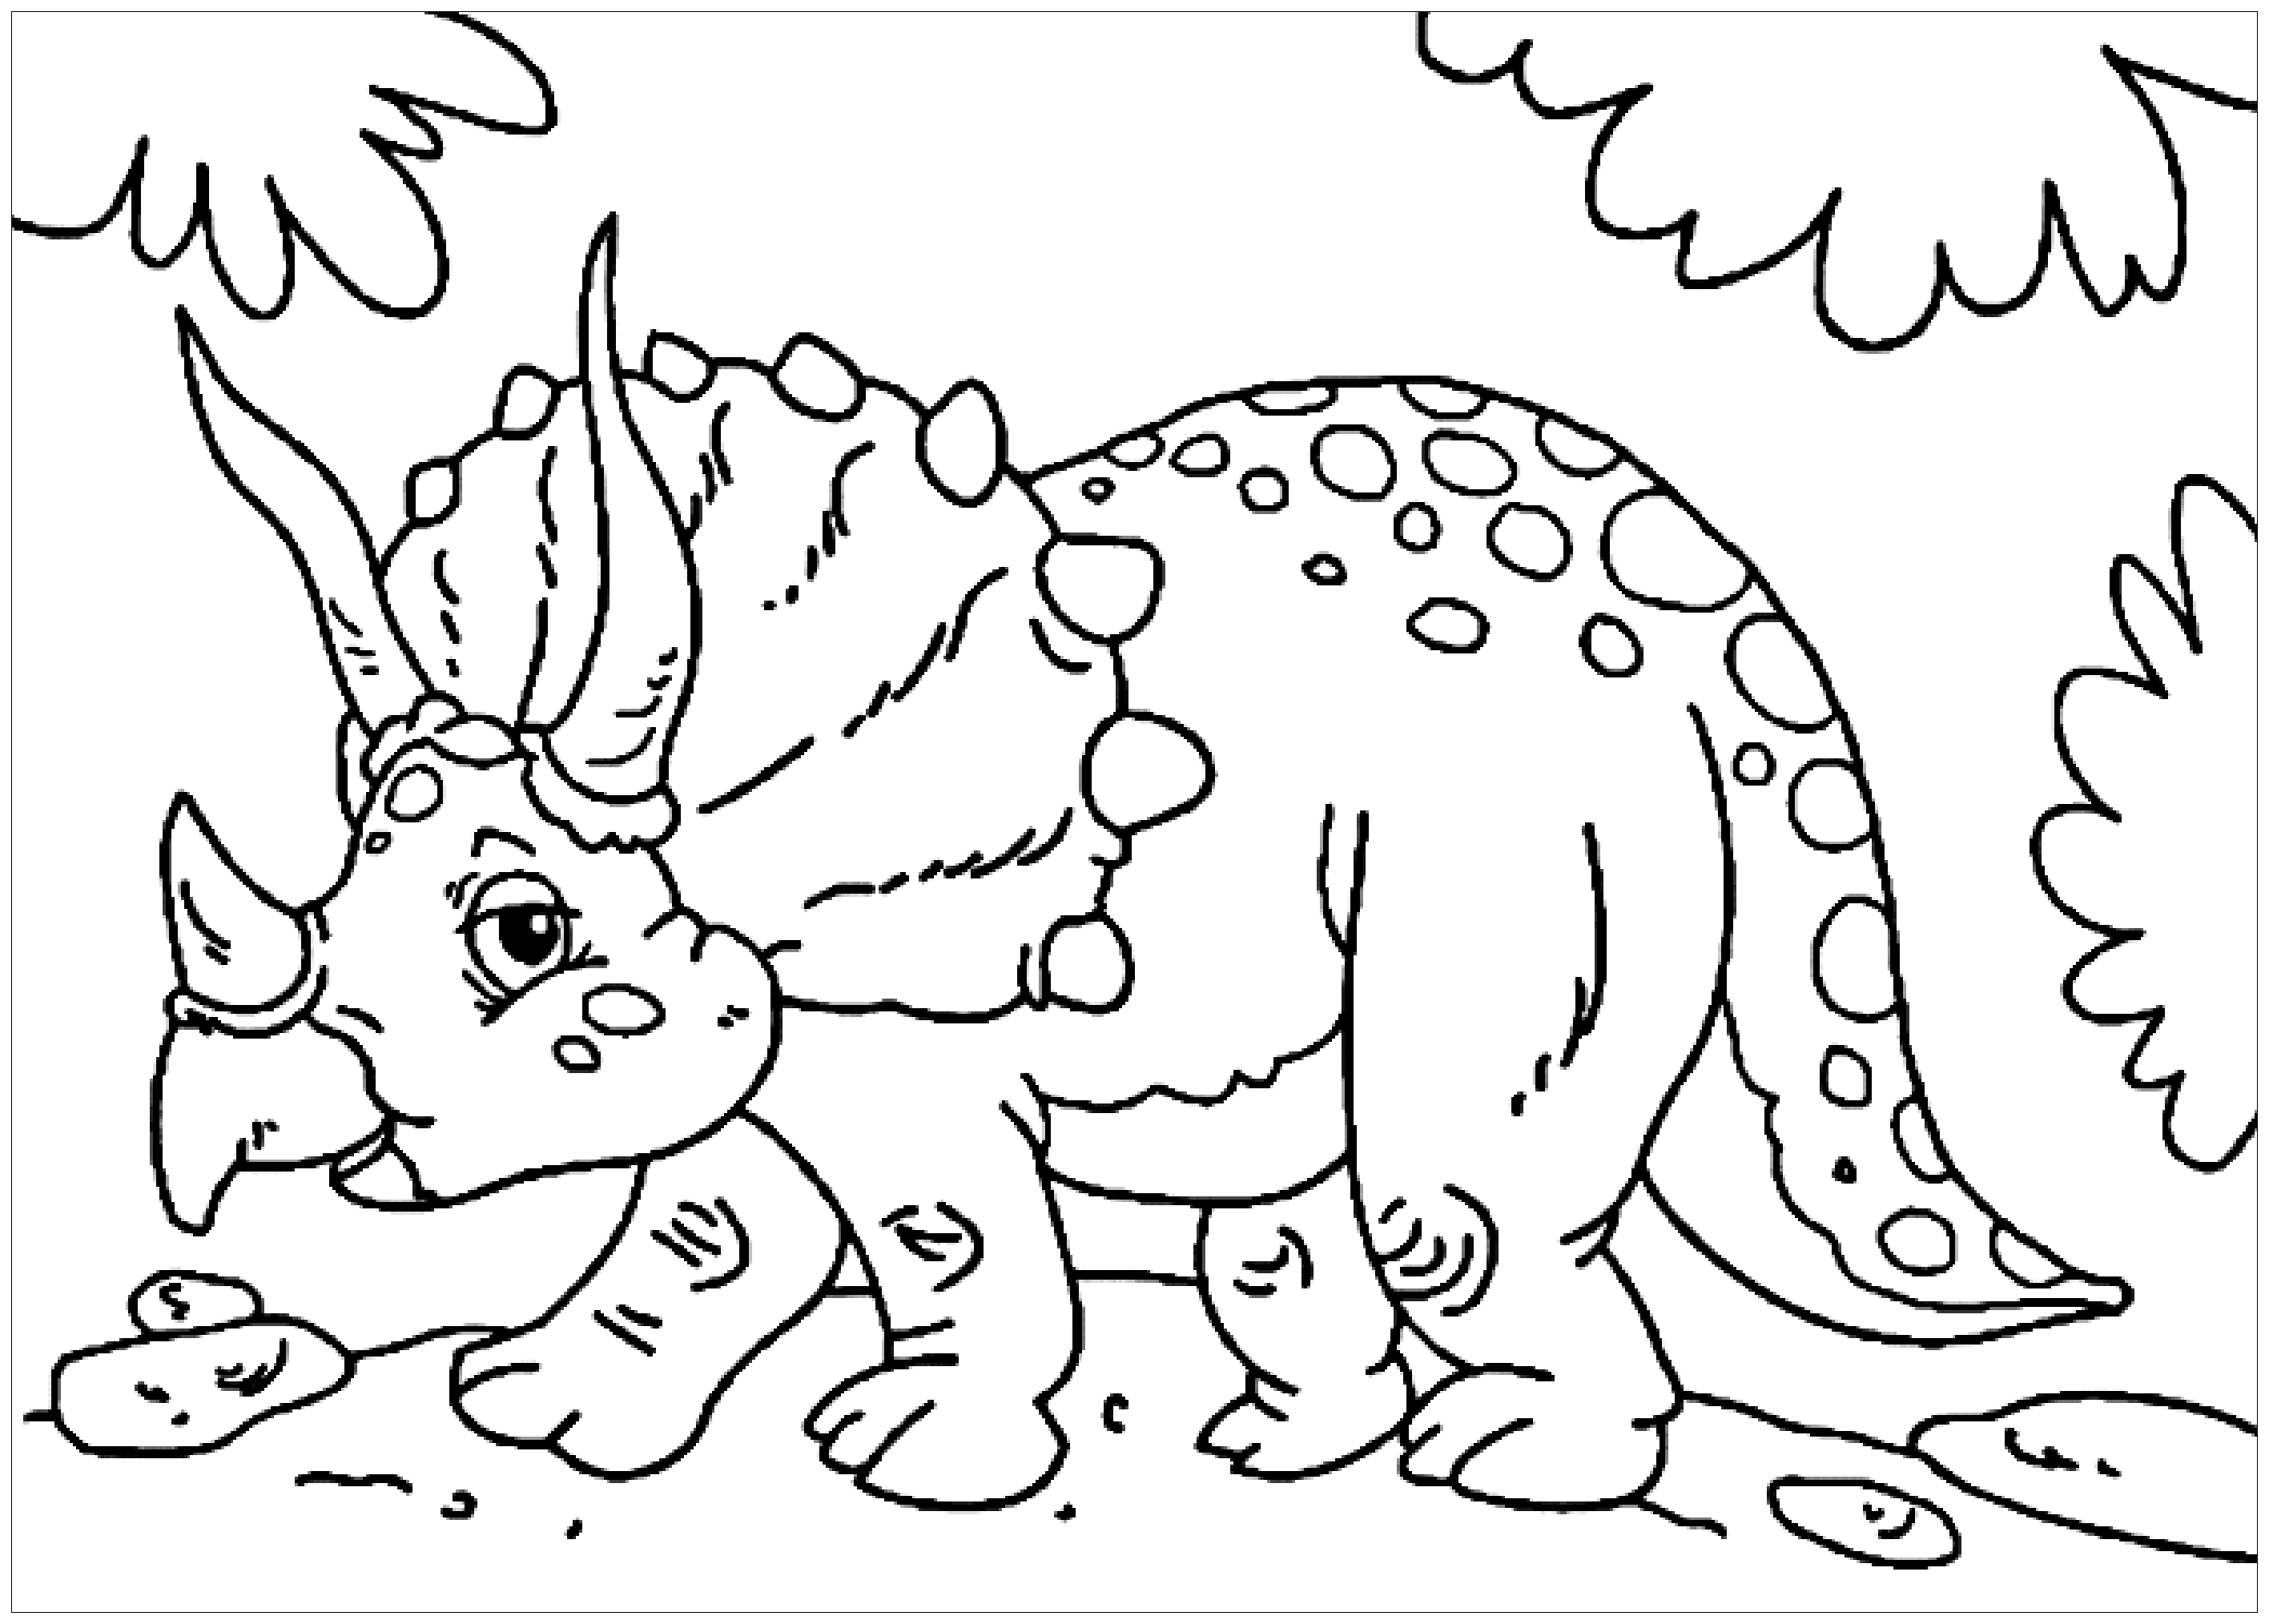 Download Dinosaurs For Children Triceratops Dinosaurs Kids Coloring Pages